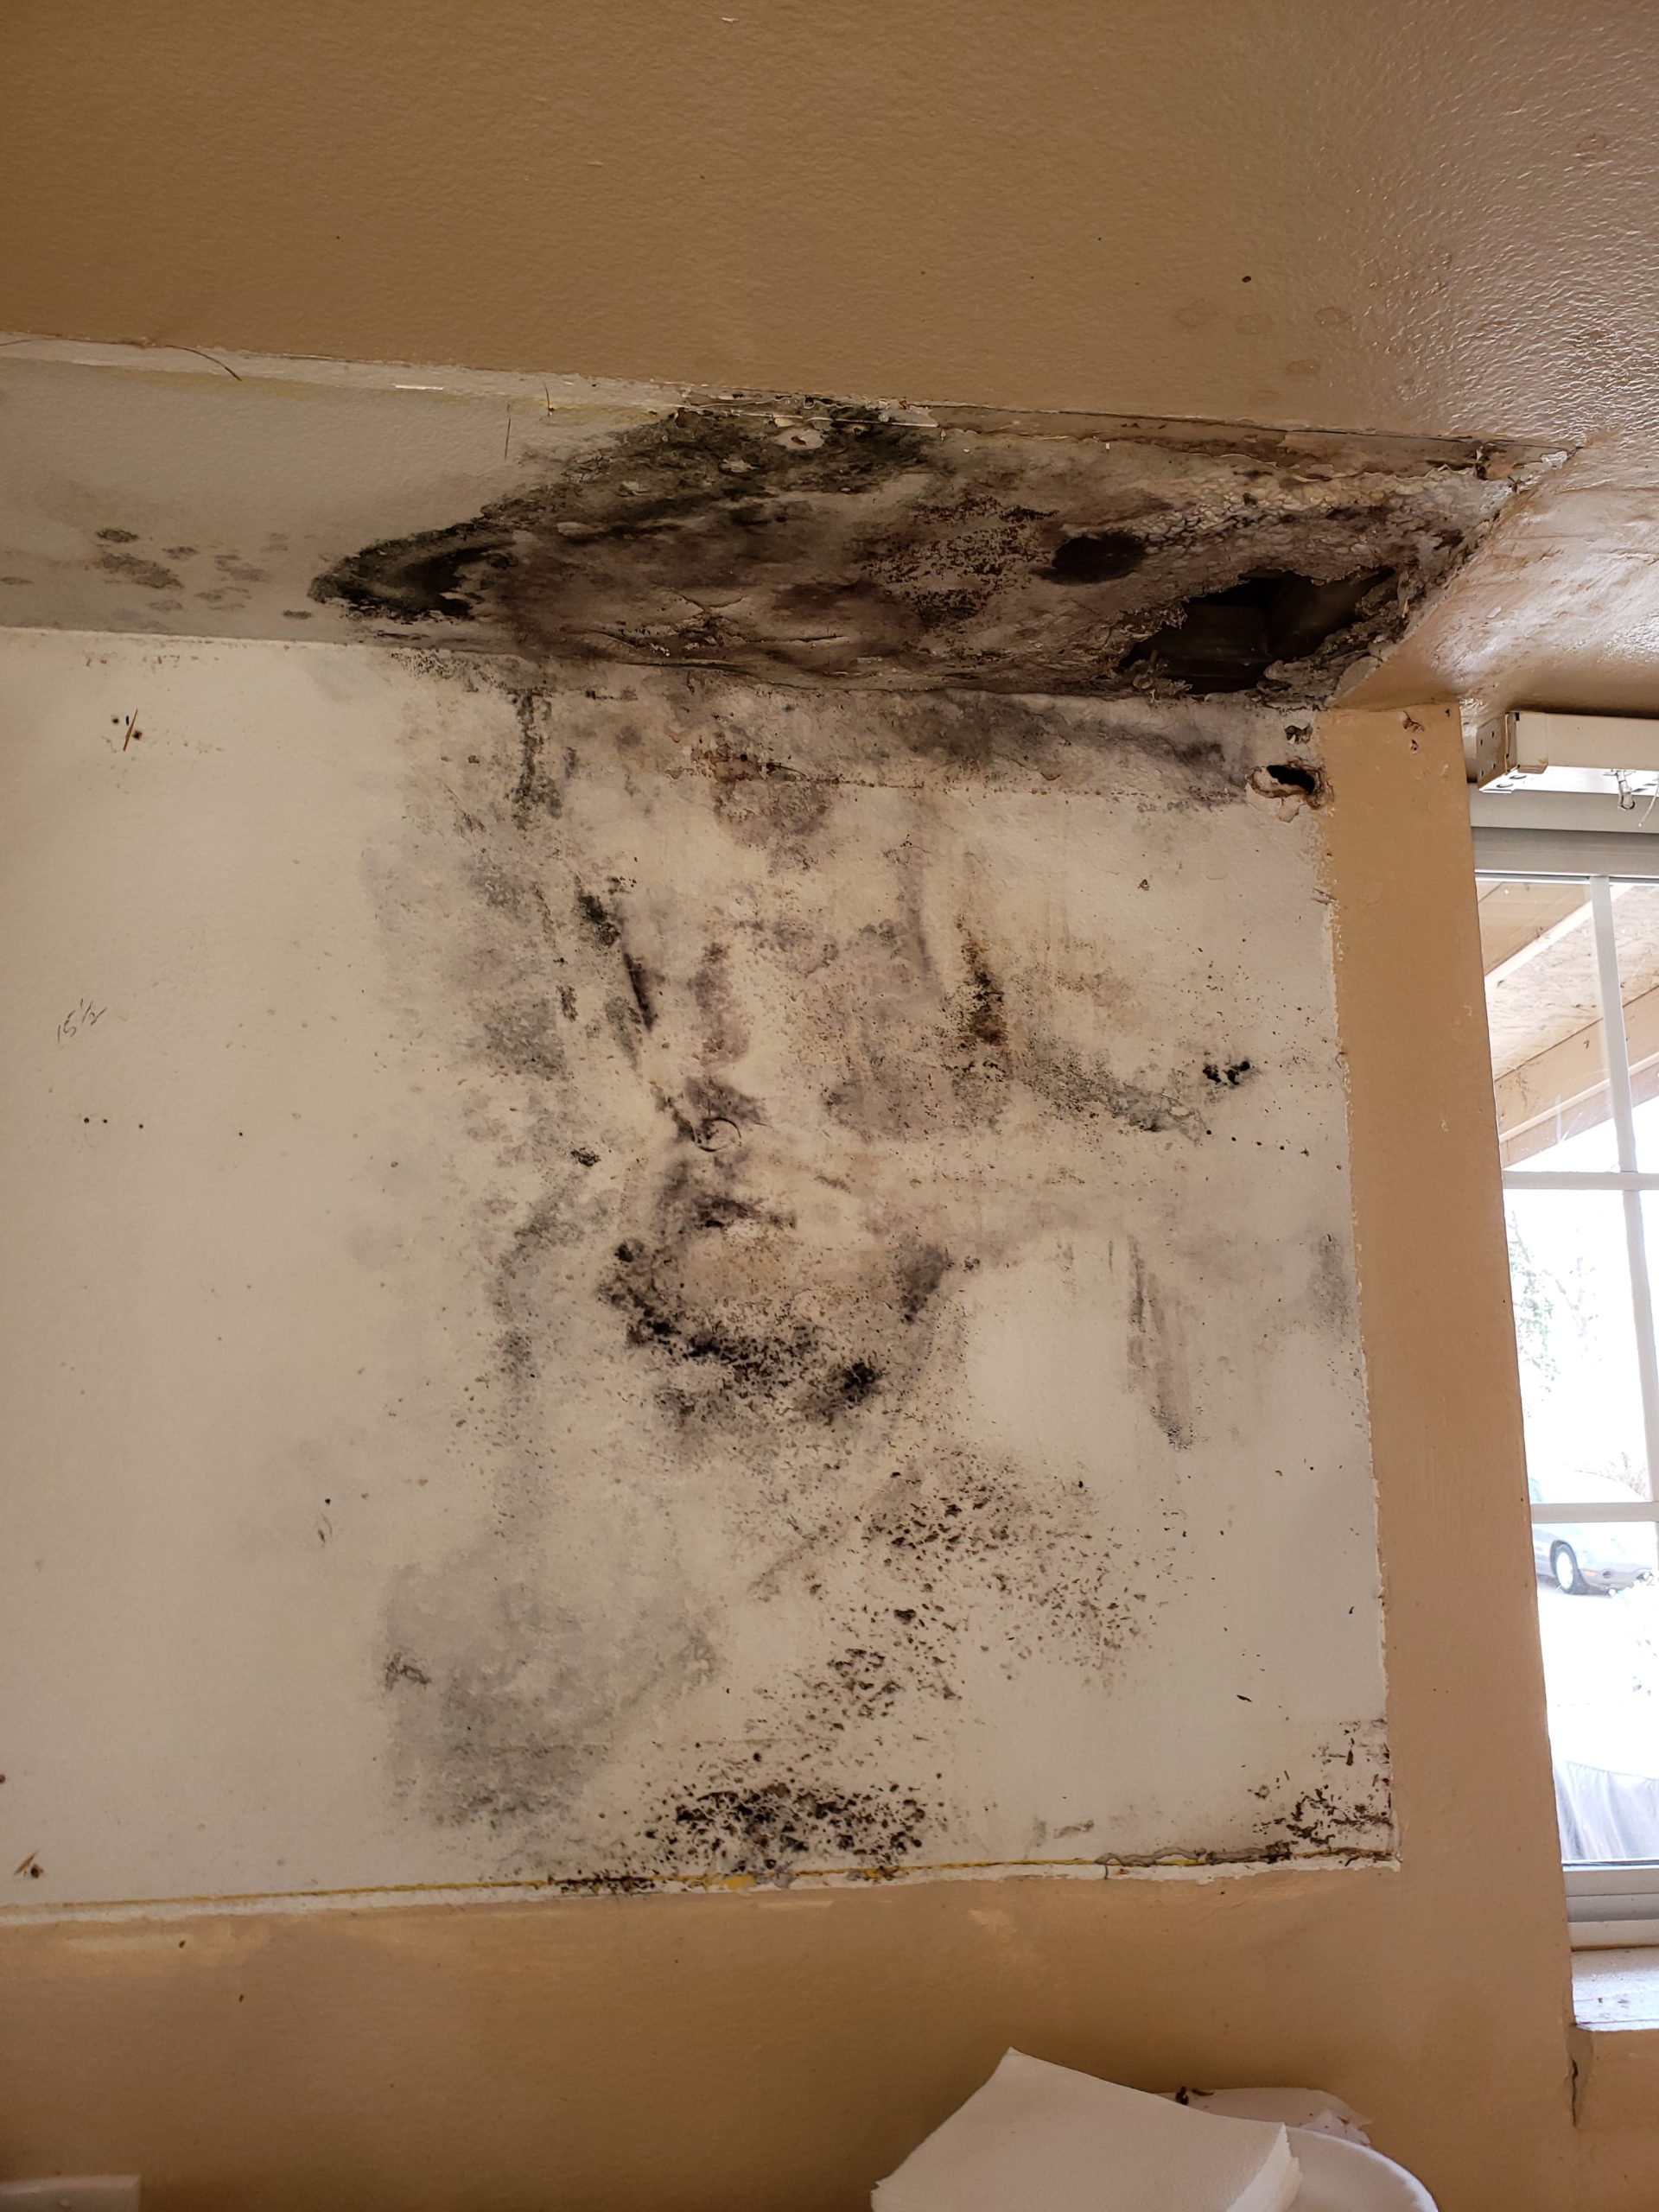 How to Check for Mold Growth in Your Home